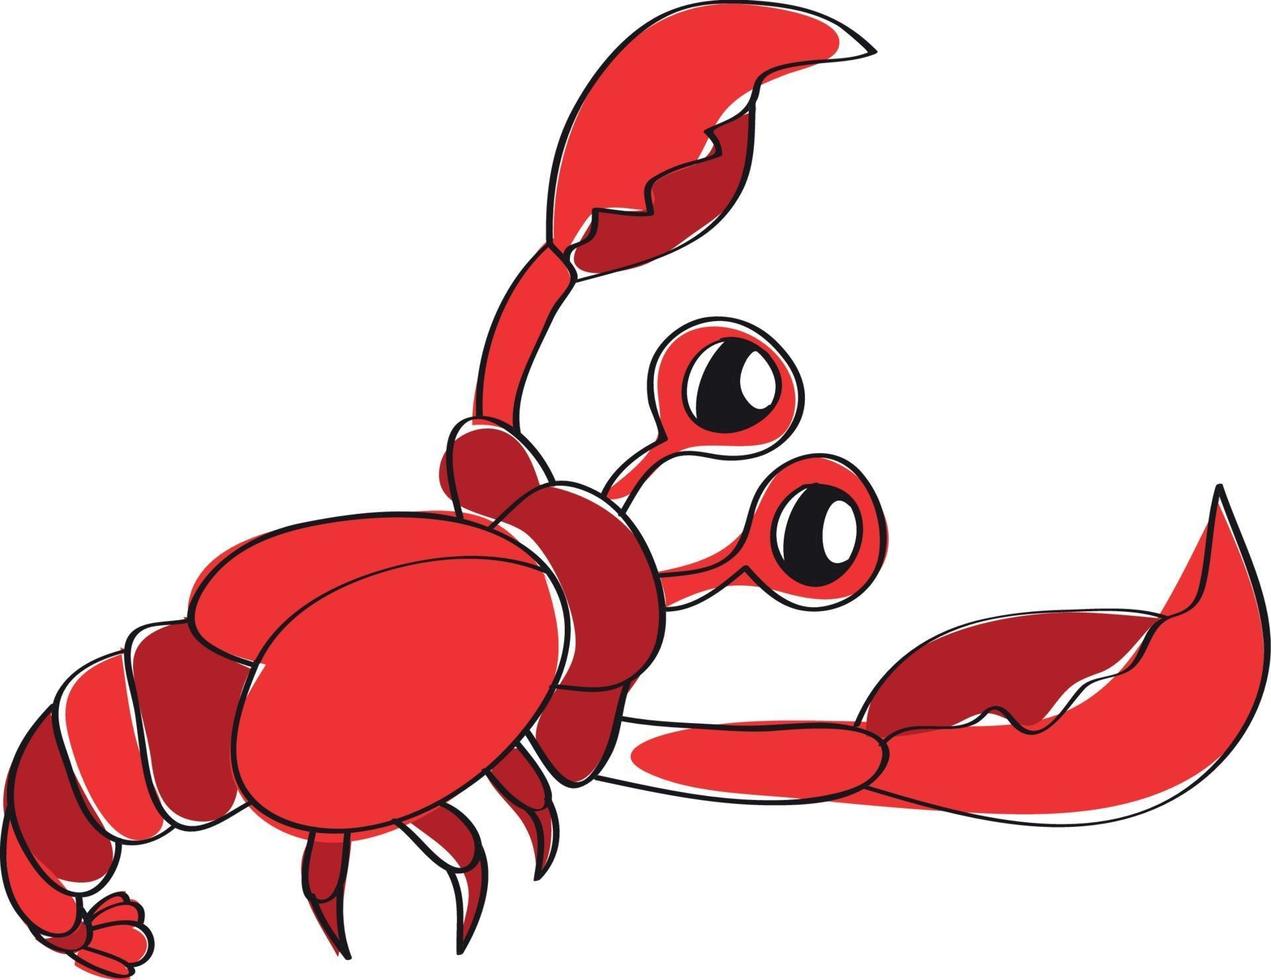 Red crayfish with a funny face vector